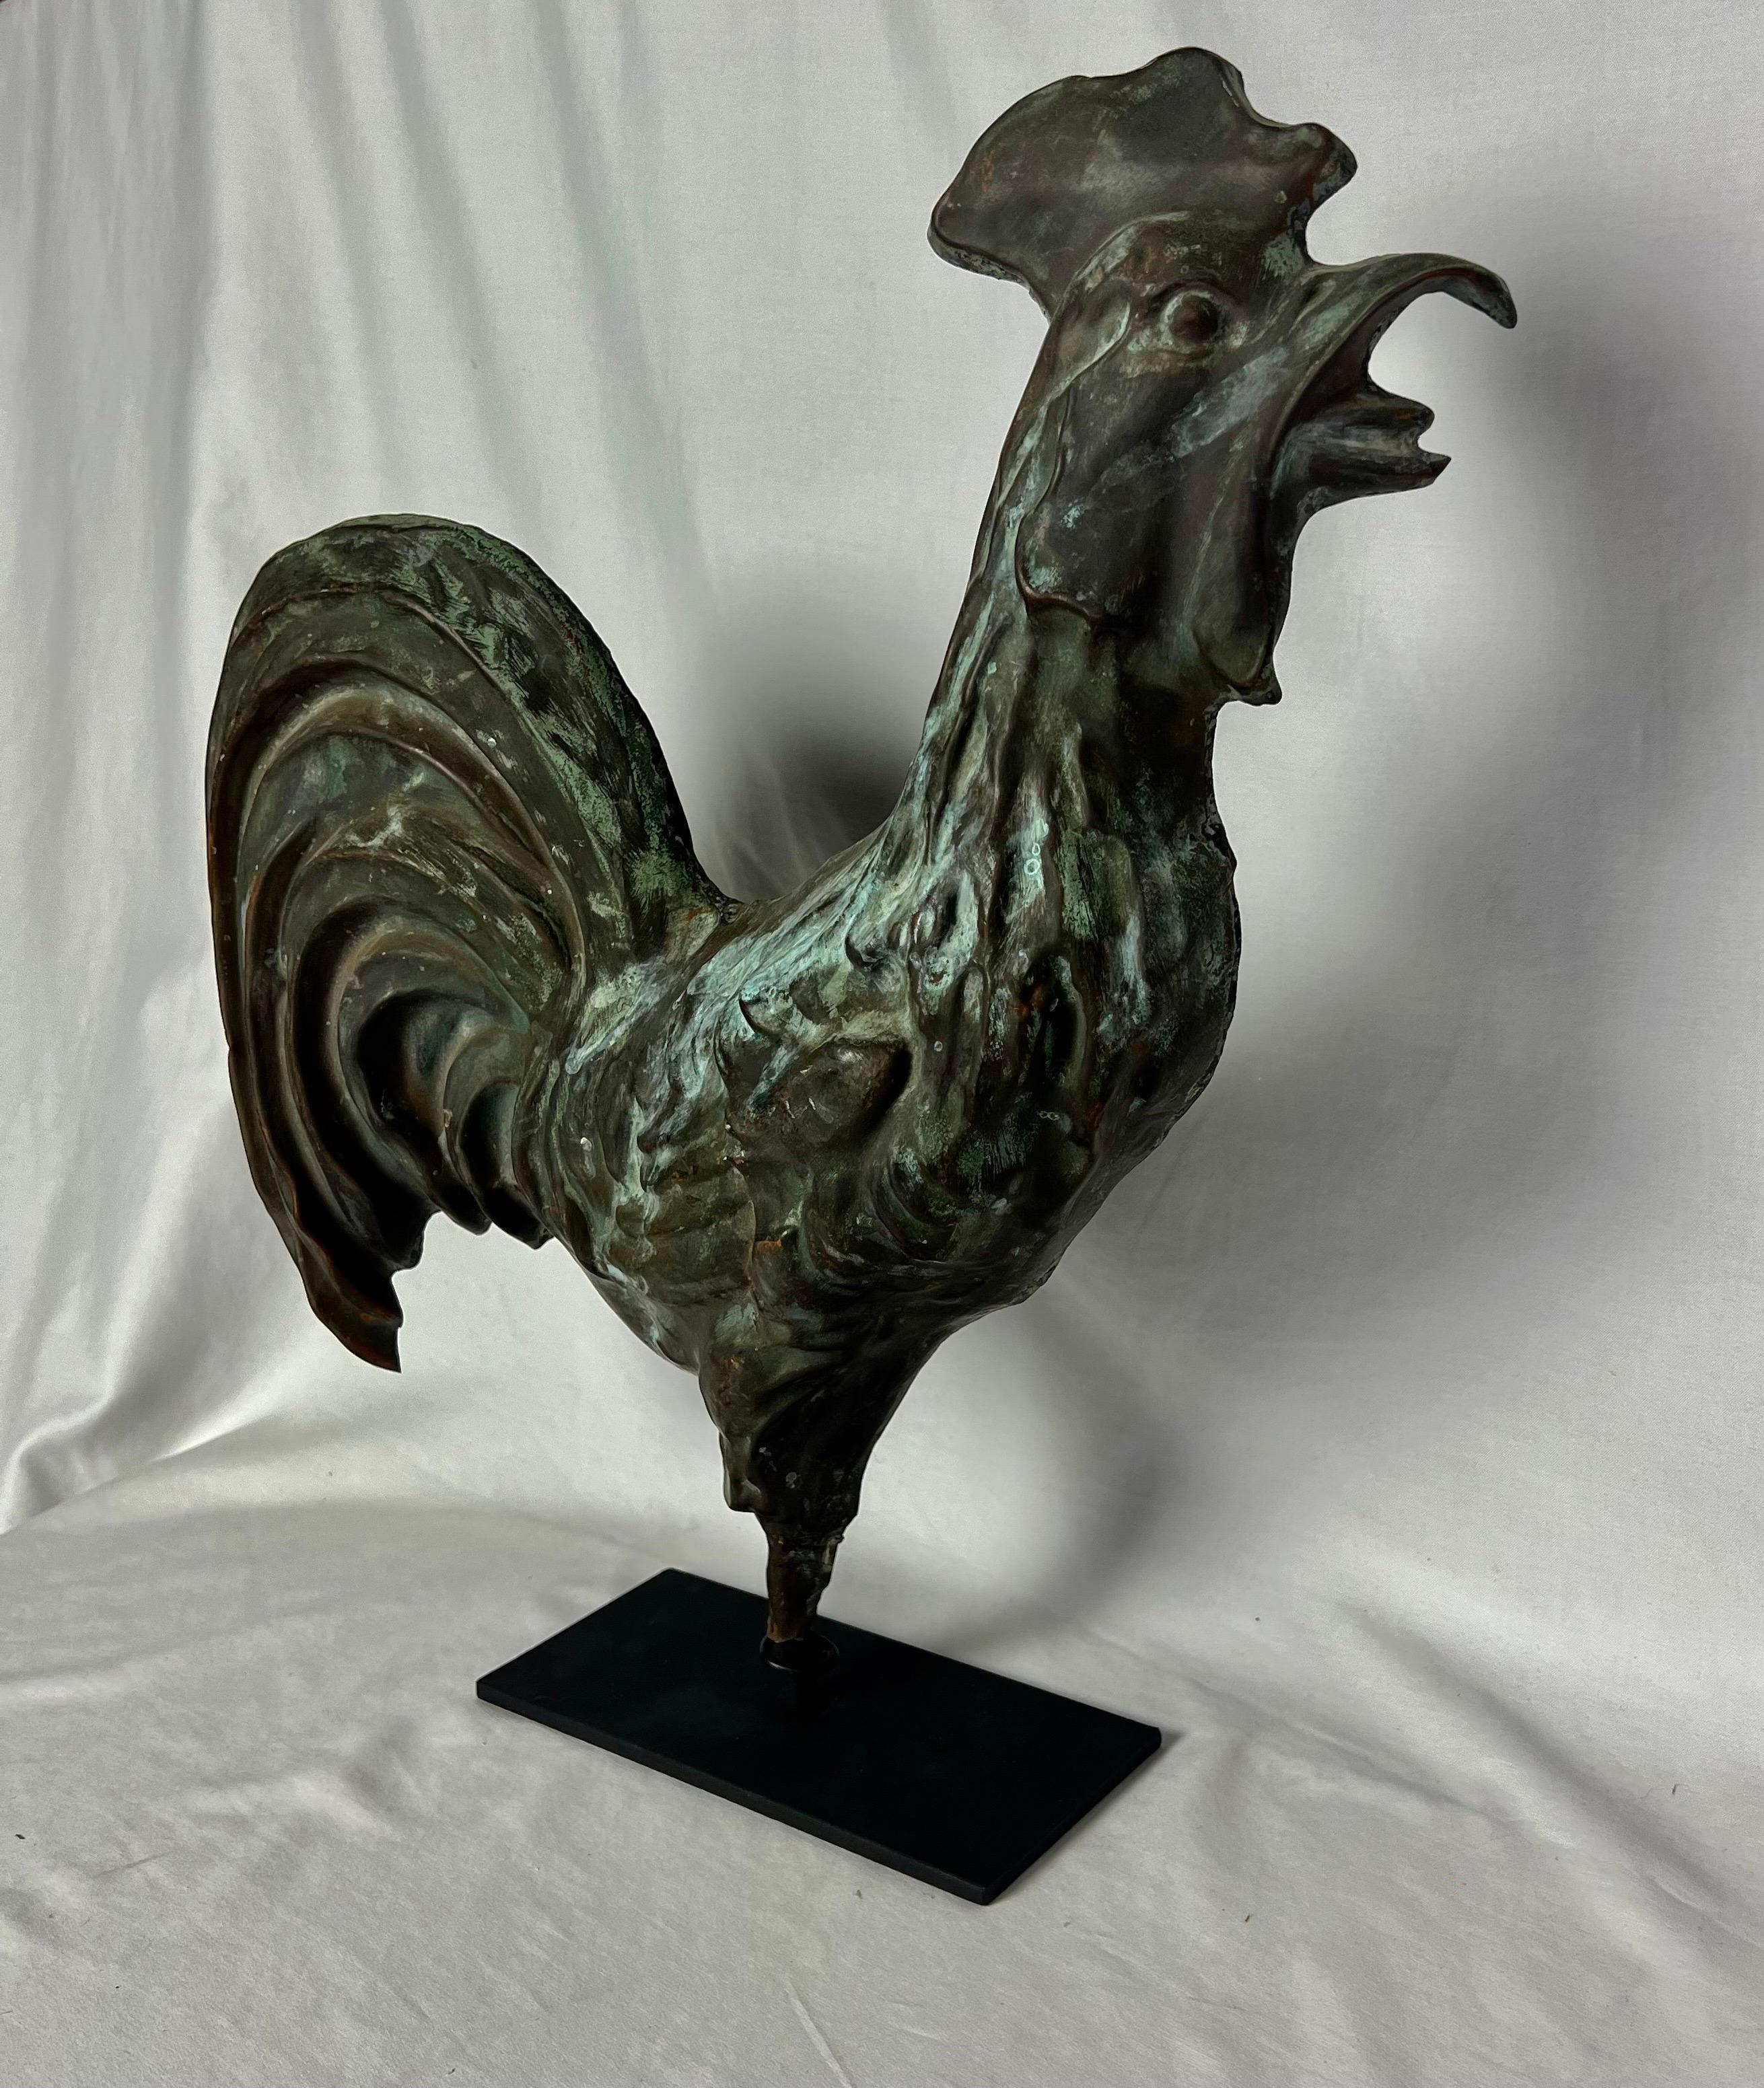 Early 20th century copper rooster that was originally part of a working weathervane. The rooster was mounted on an iron base and it is a perfect accent for your home.